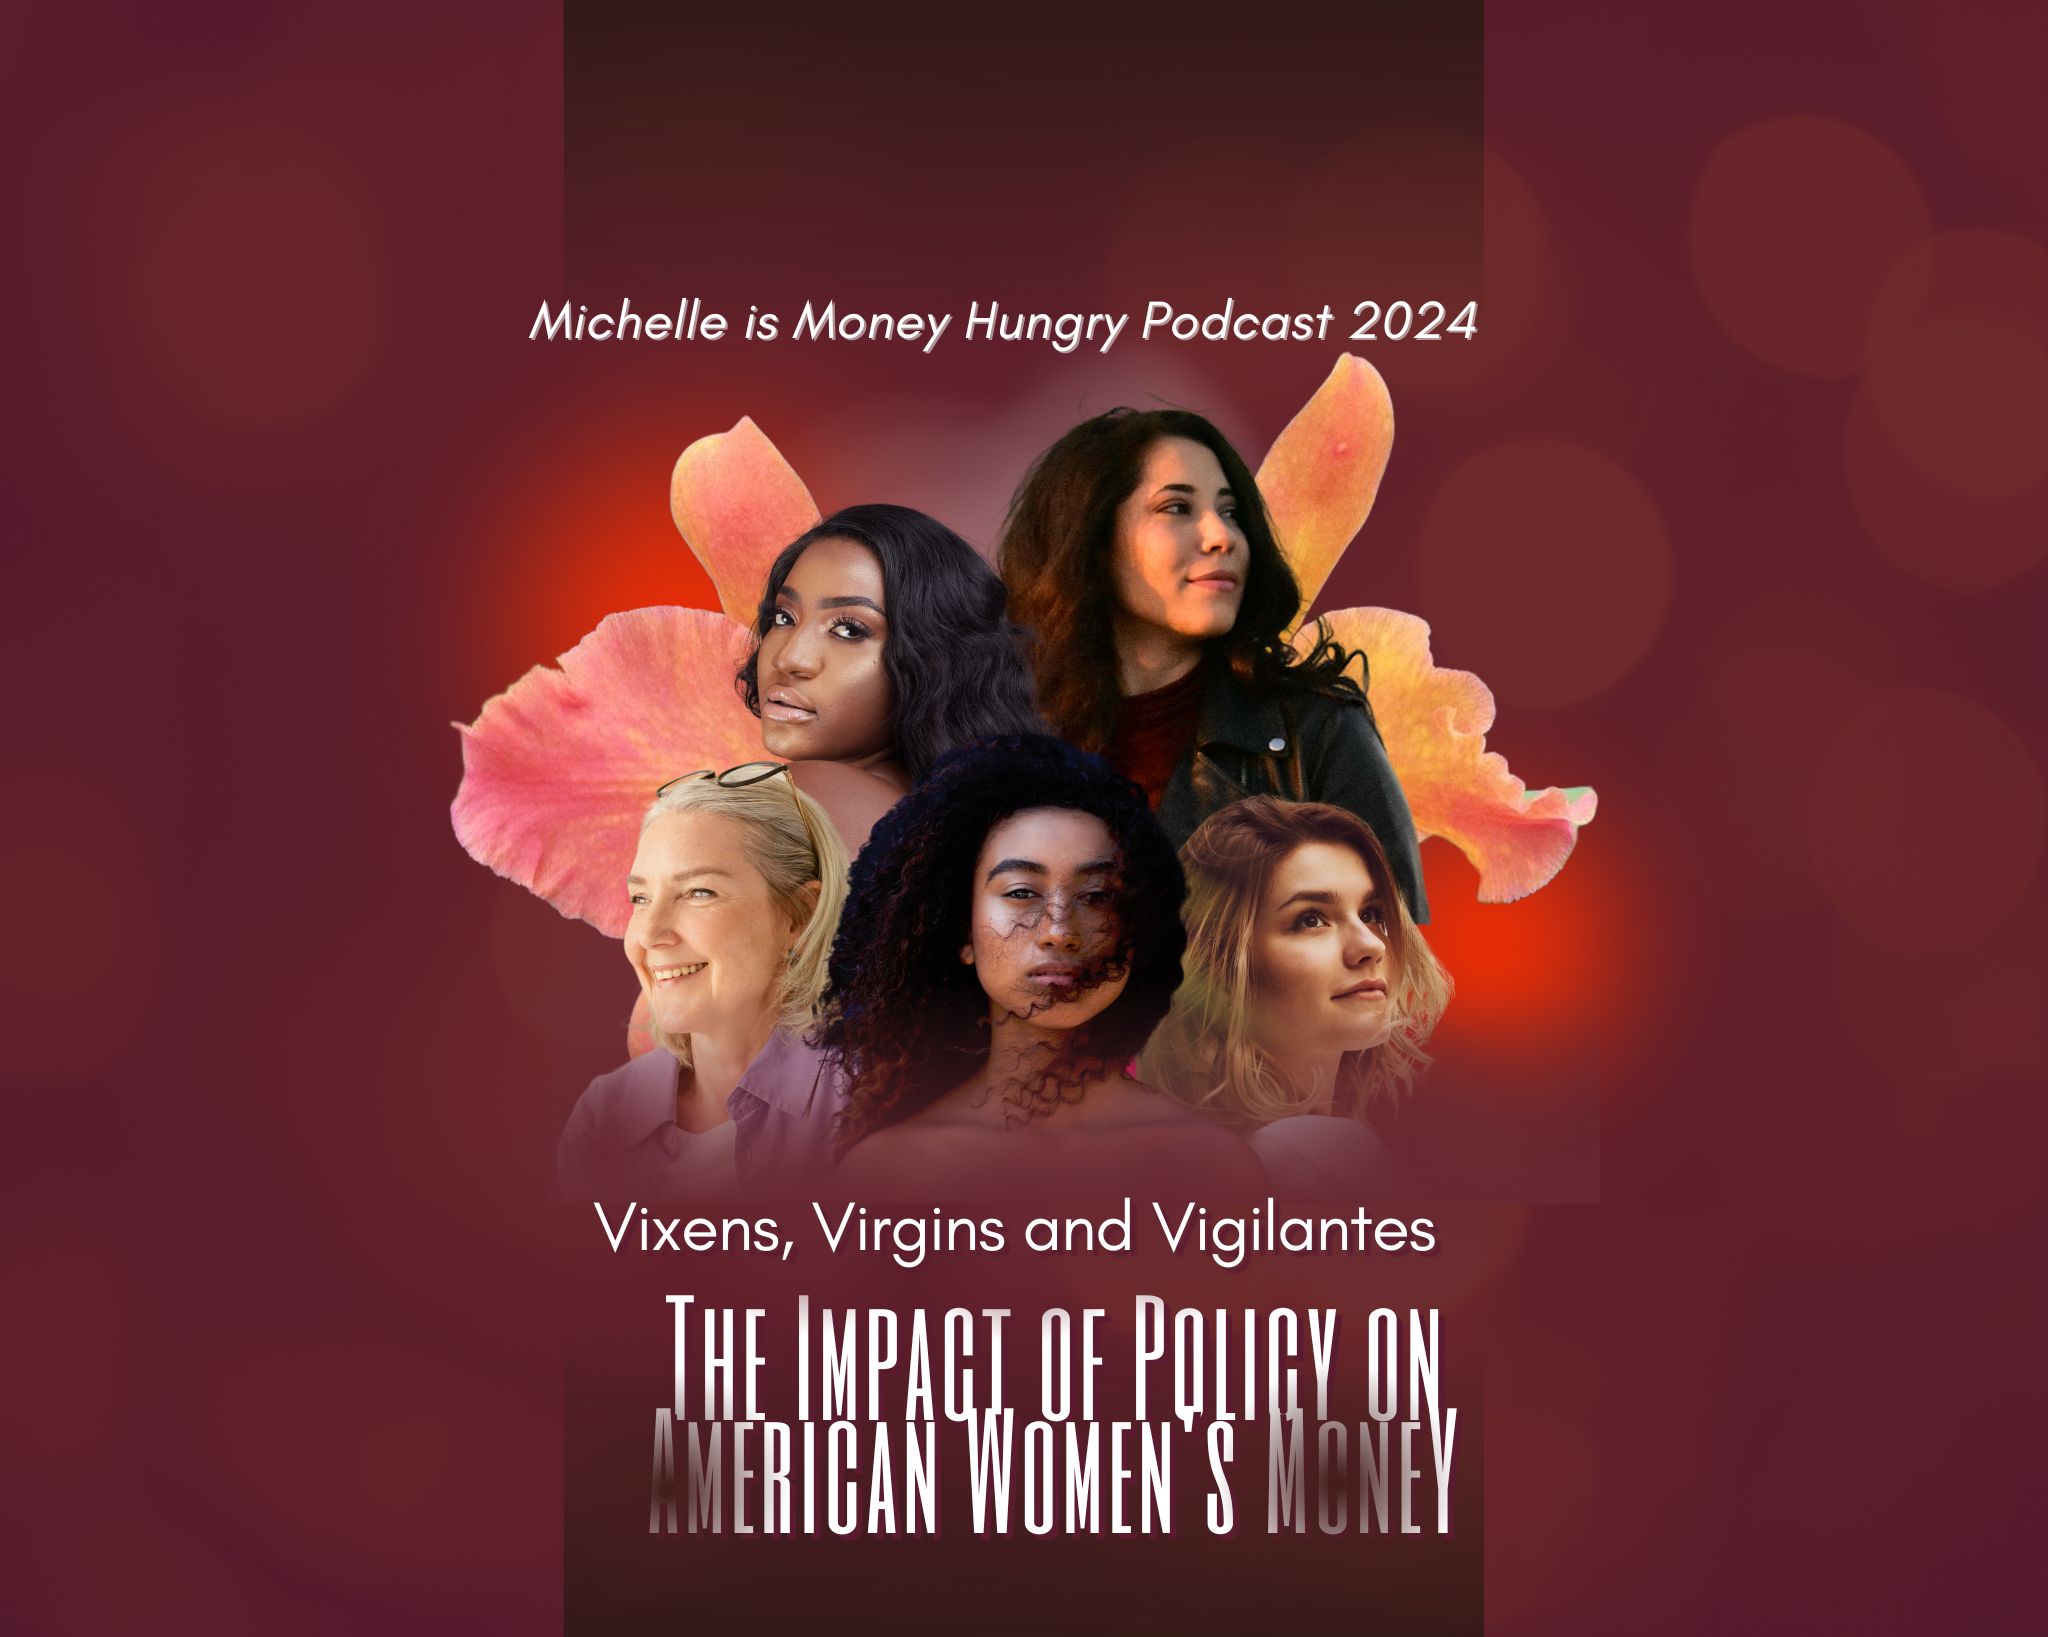 Vixens, Virgins and Vigilantes: The Impact of Policy on American Women's Money